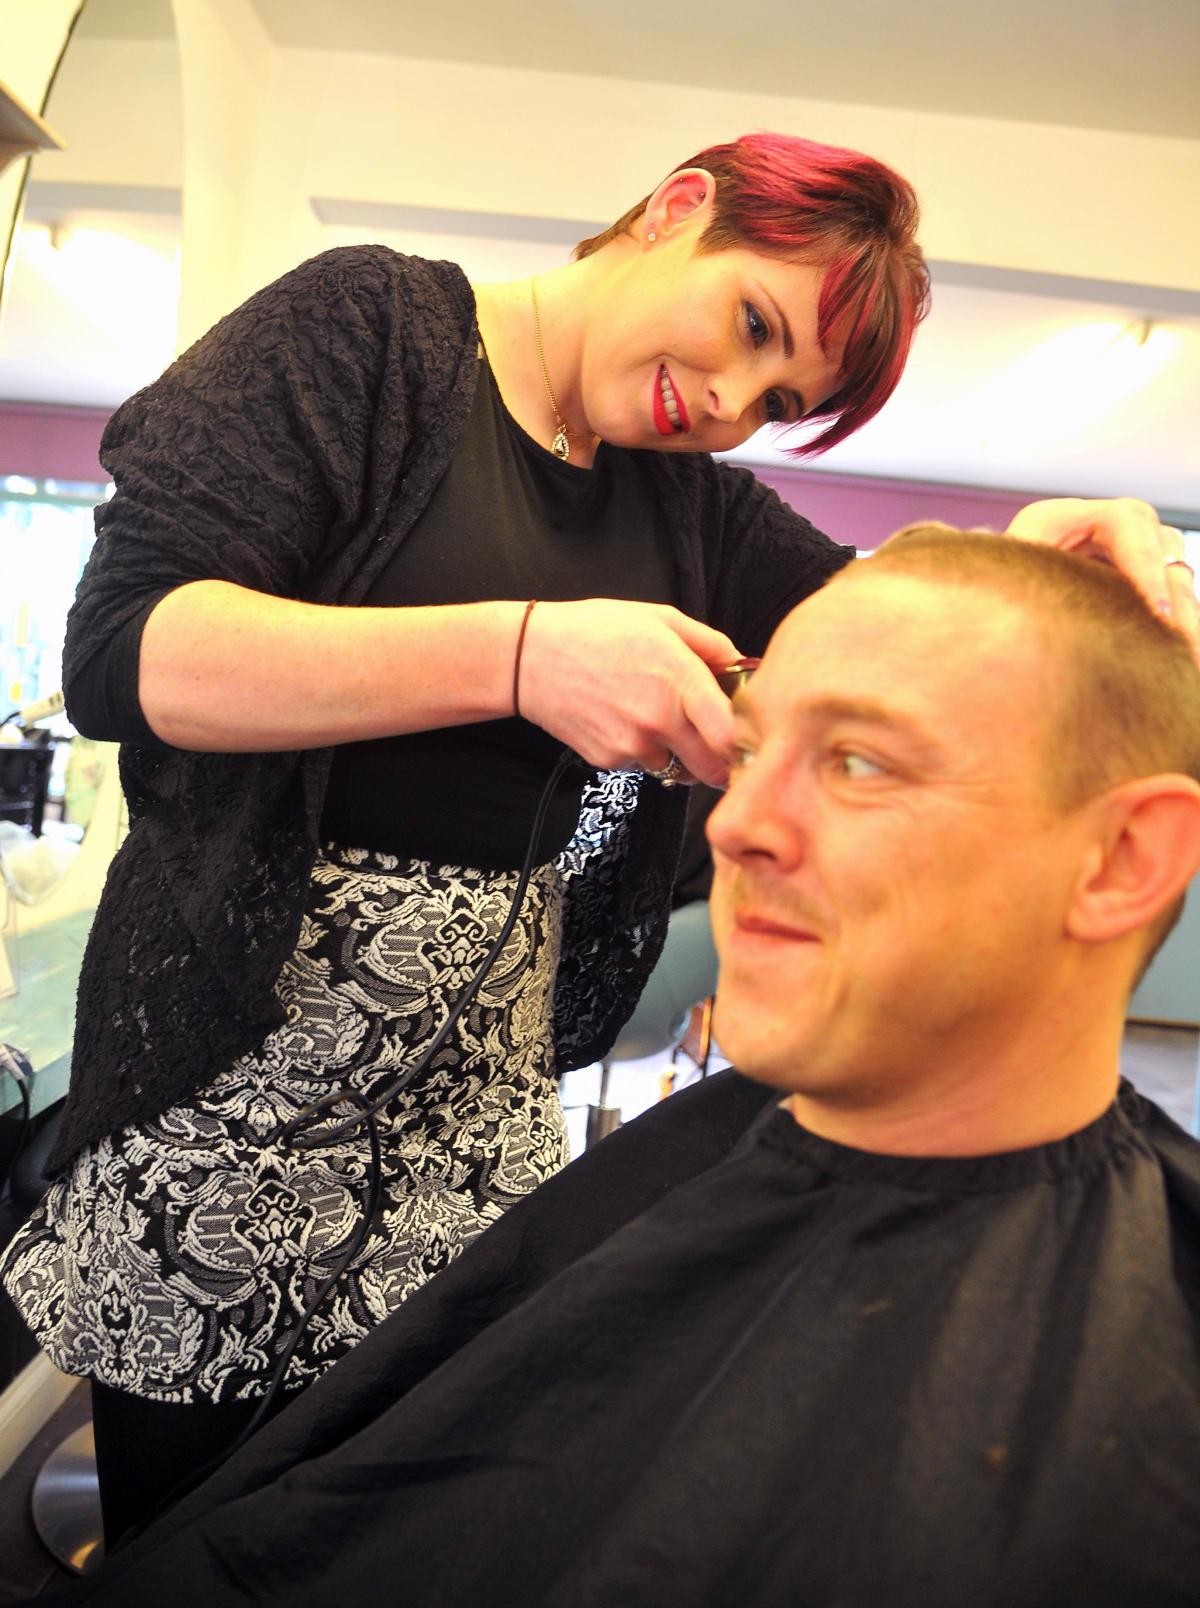 Haircuts For The Homeless Offered At Unique Event In Gorse